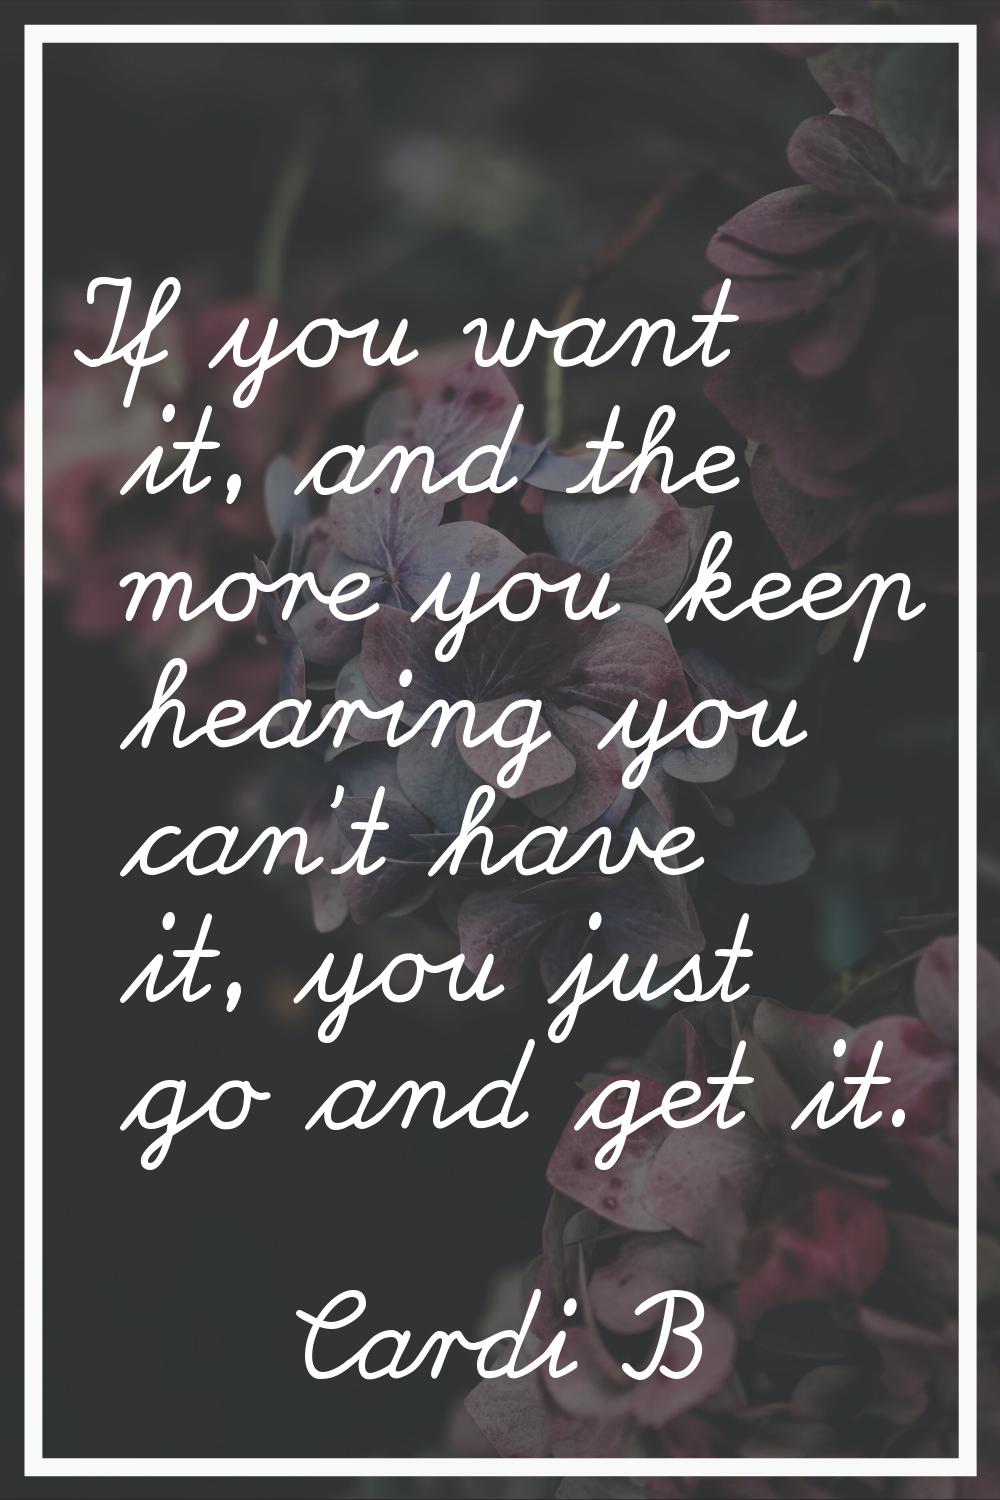 If you want it, and the more you keep hearing you can't have it, you just go and get it.